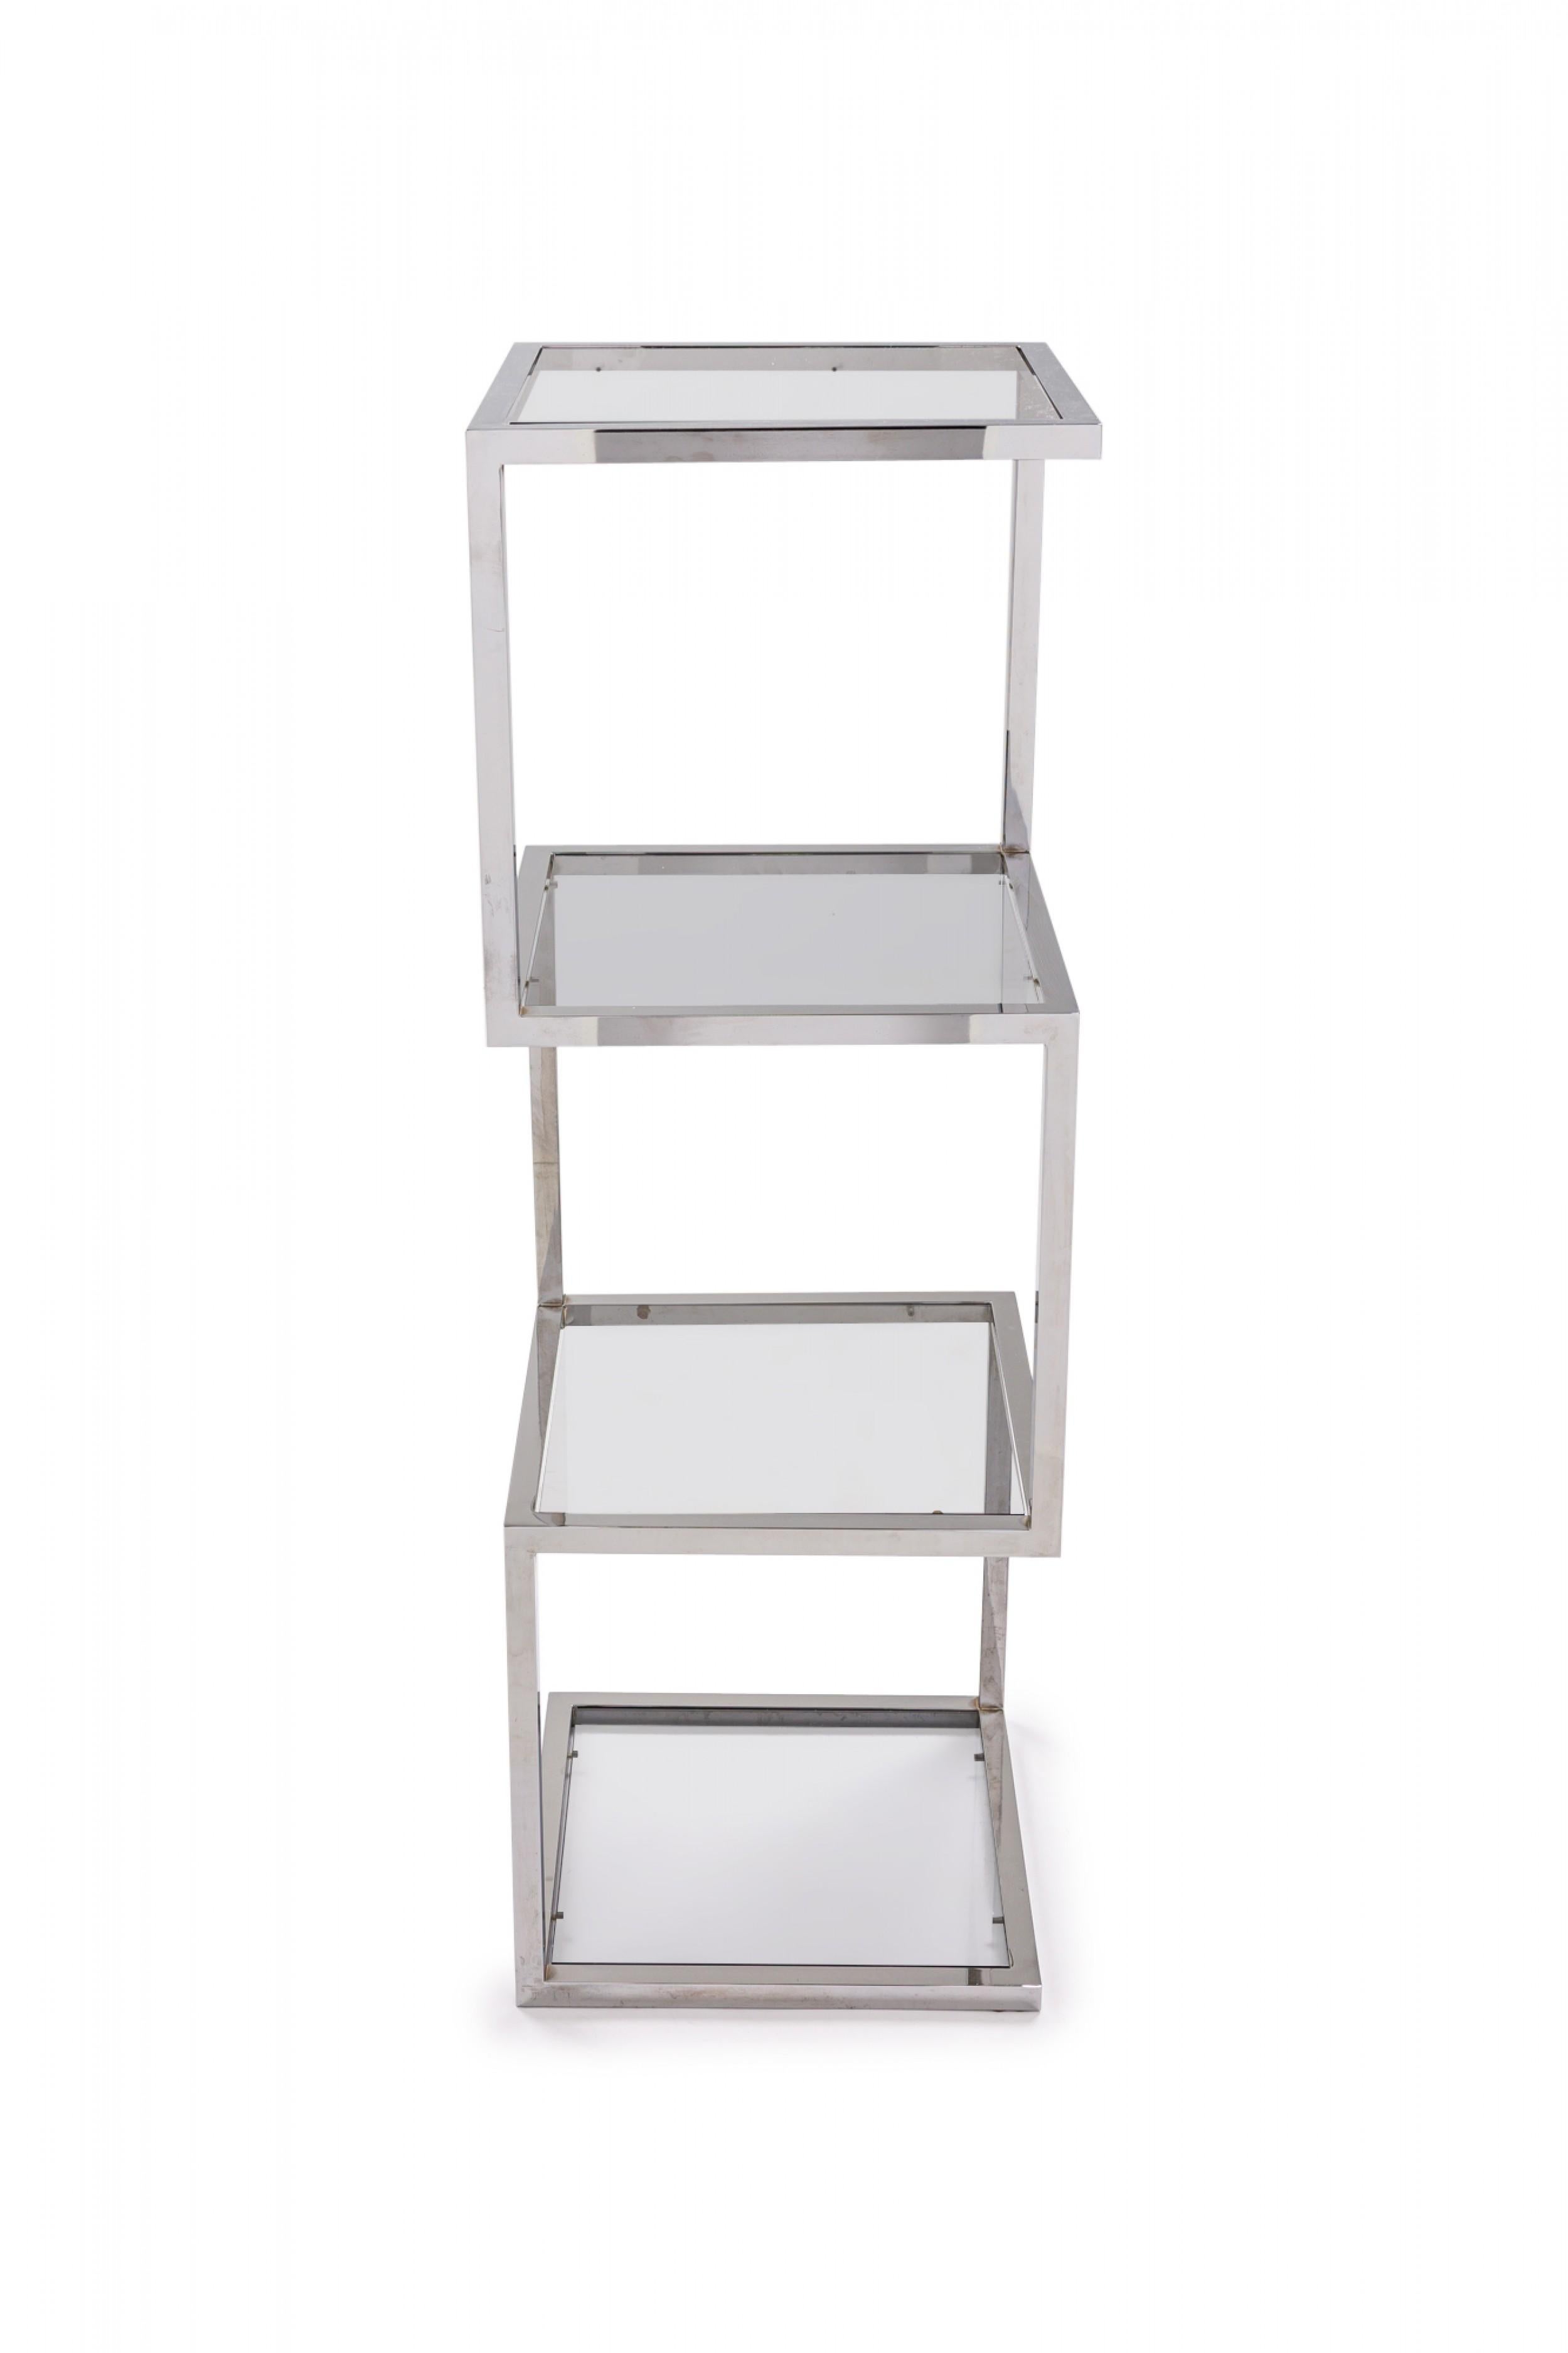 Mid-Century Modern Polished Chrome-Plated Steel and Smoked Glass Etagere / Display Shelf For Sale